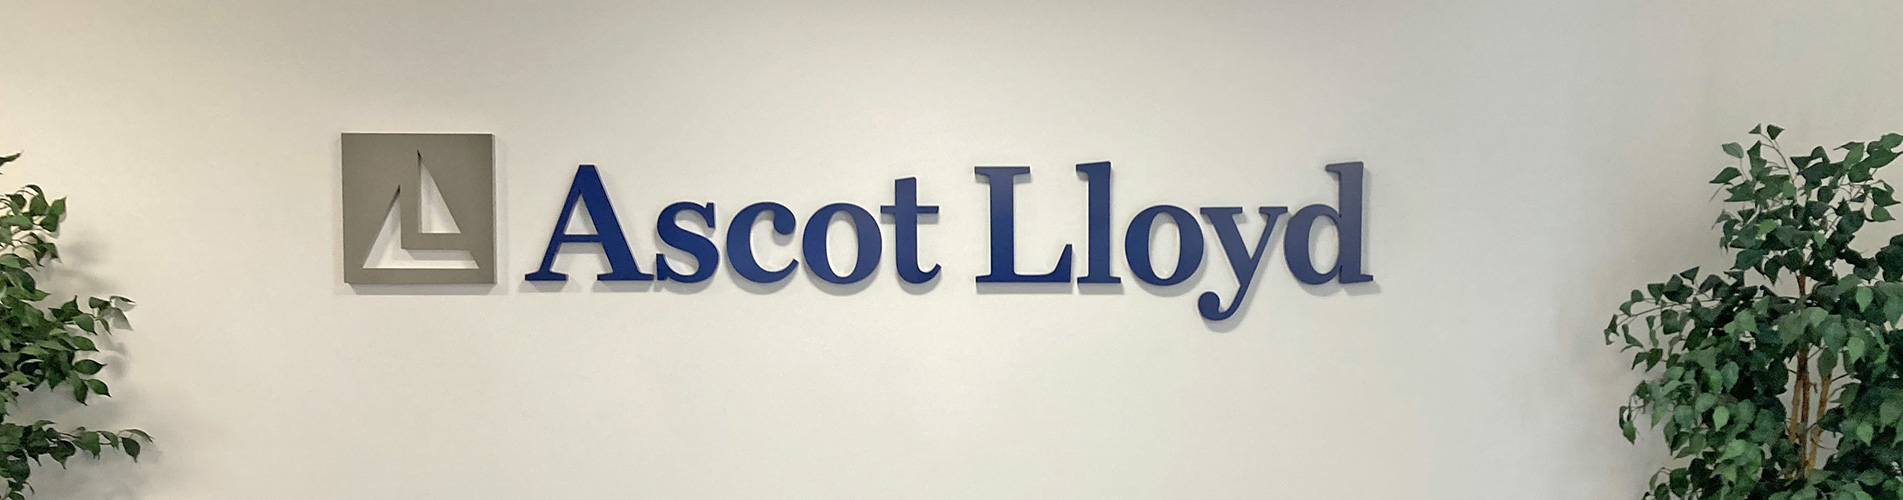 Ascot Lloyd Terms and Conditions